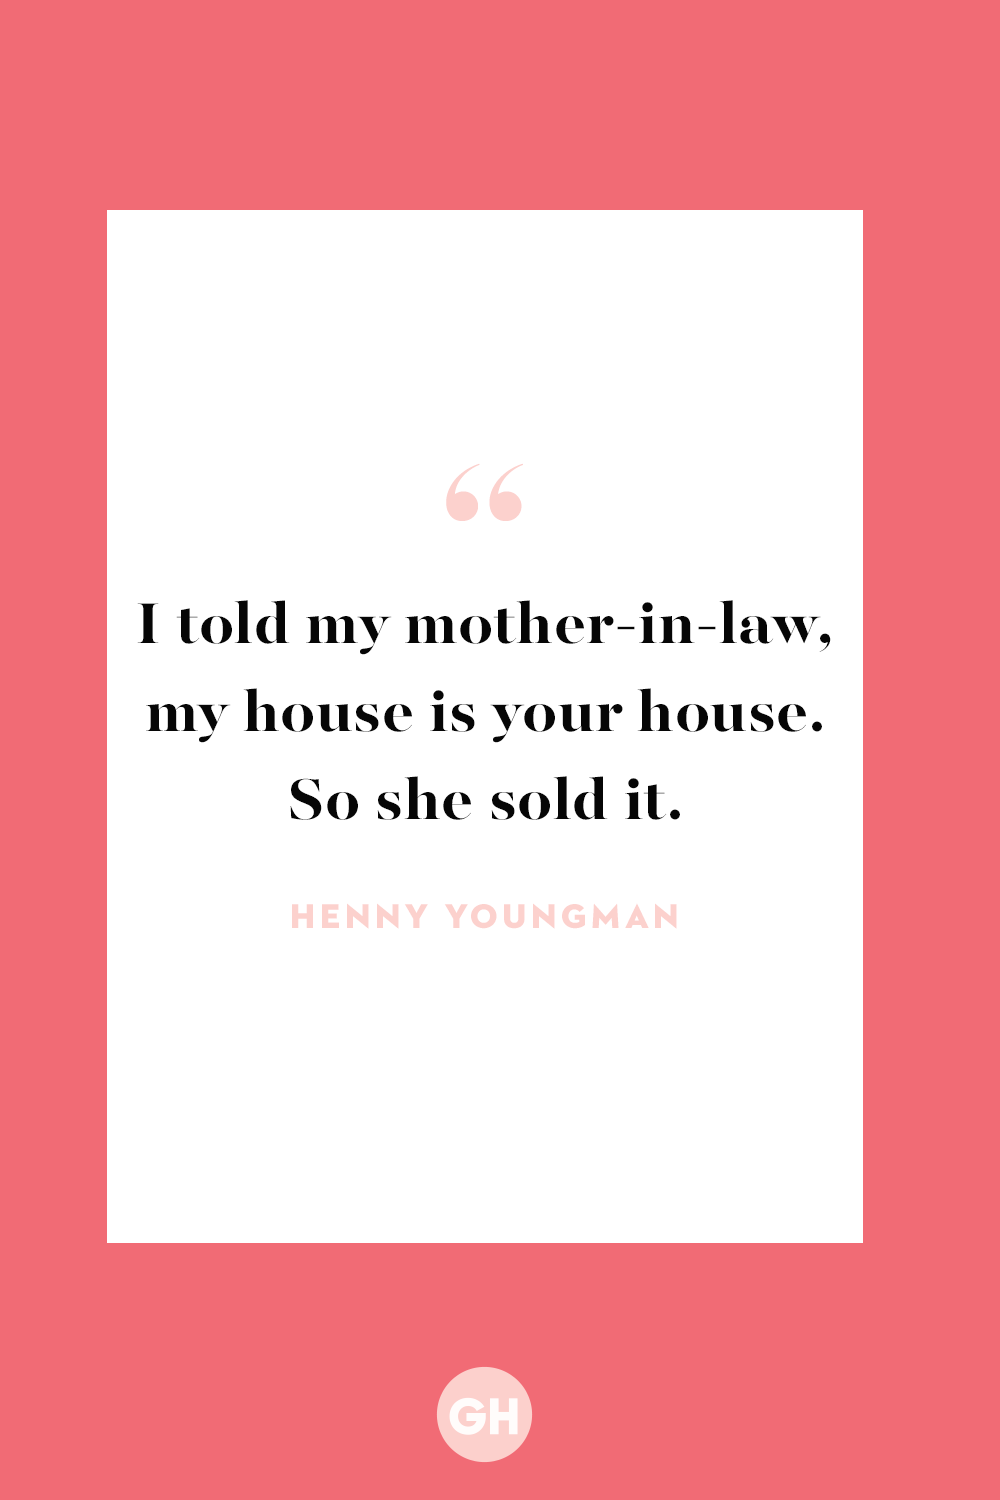 30 Best Mother-In-Law Quotes And Sayings